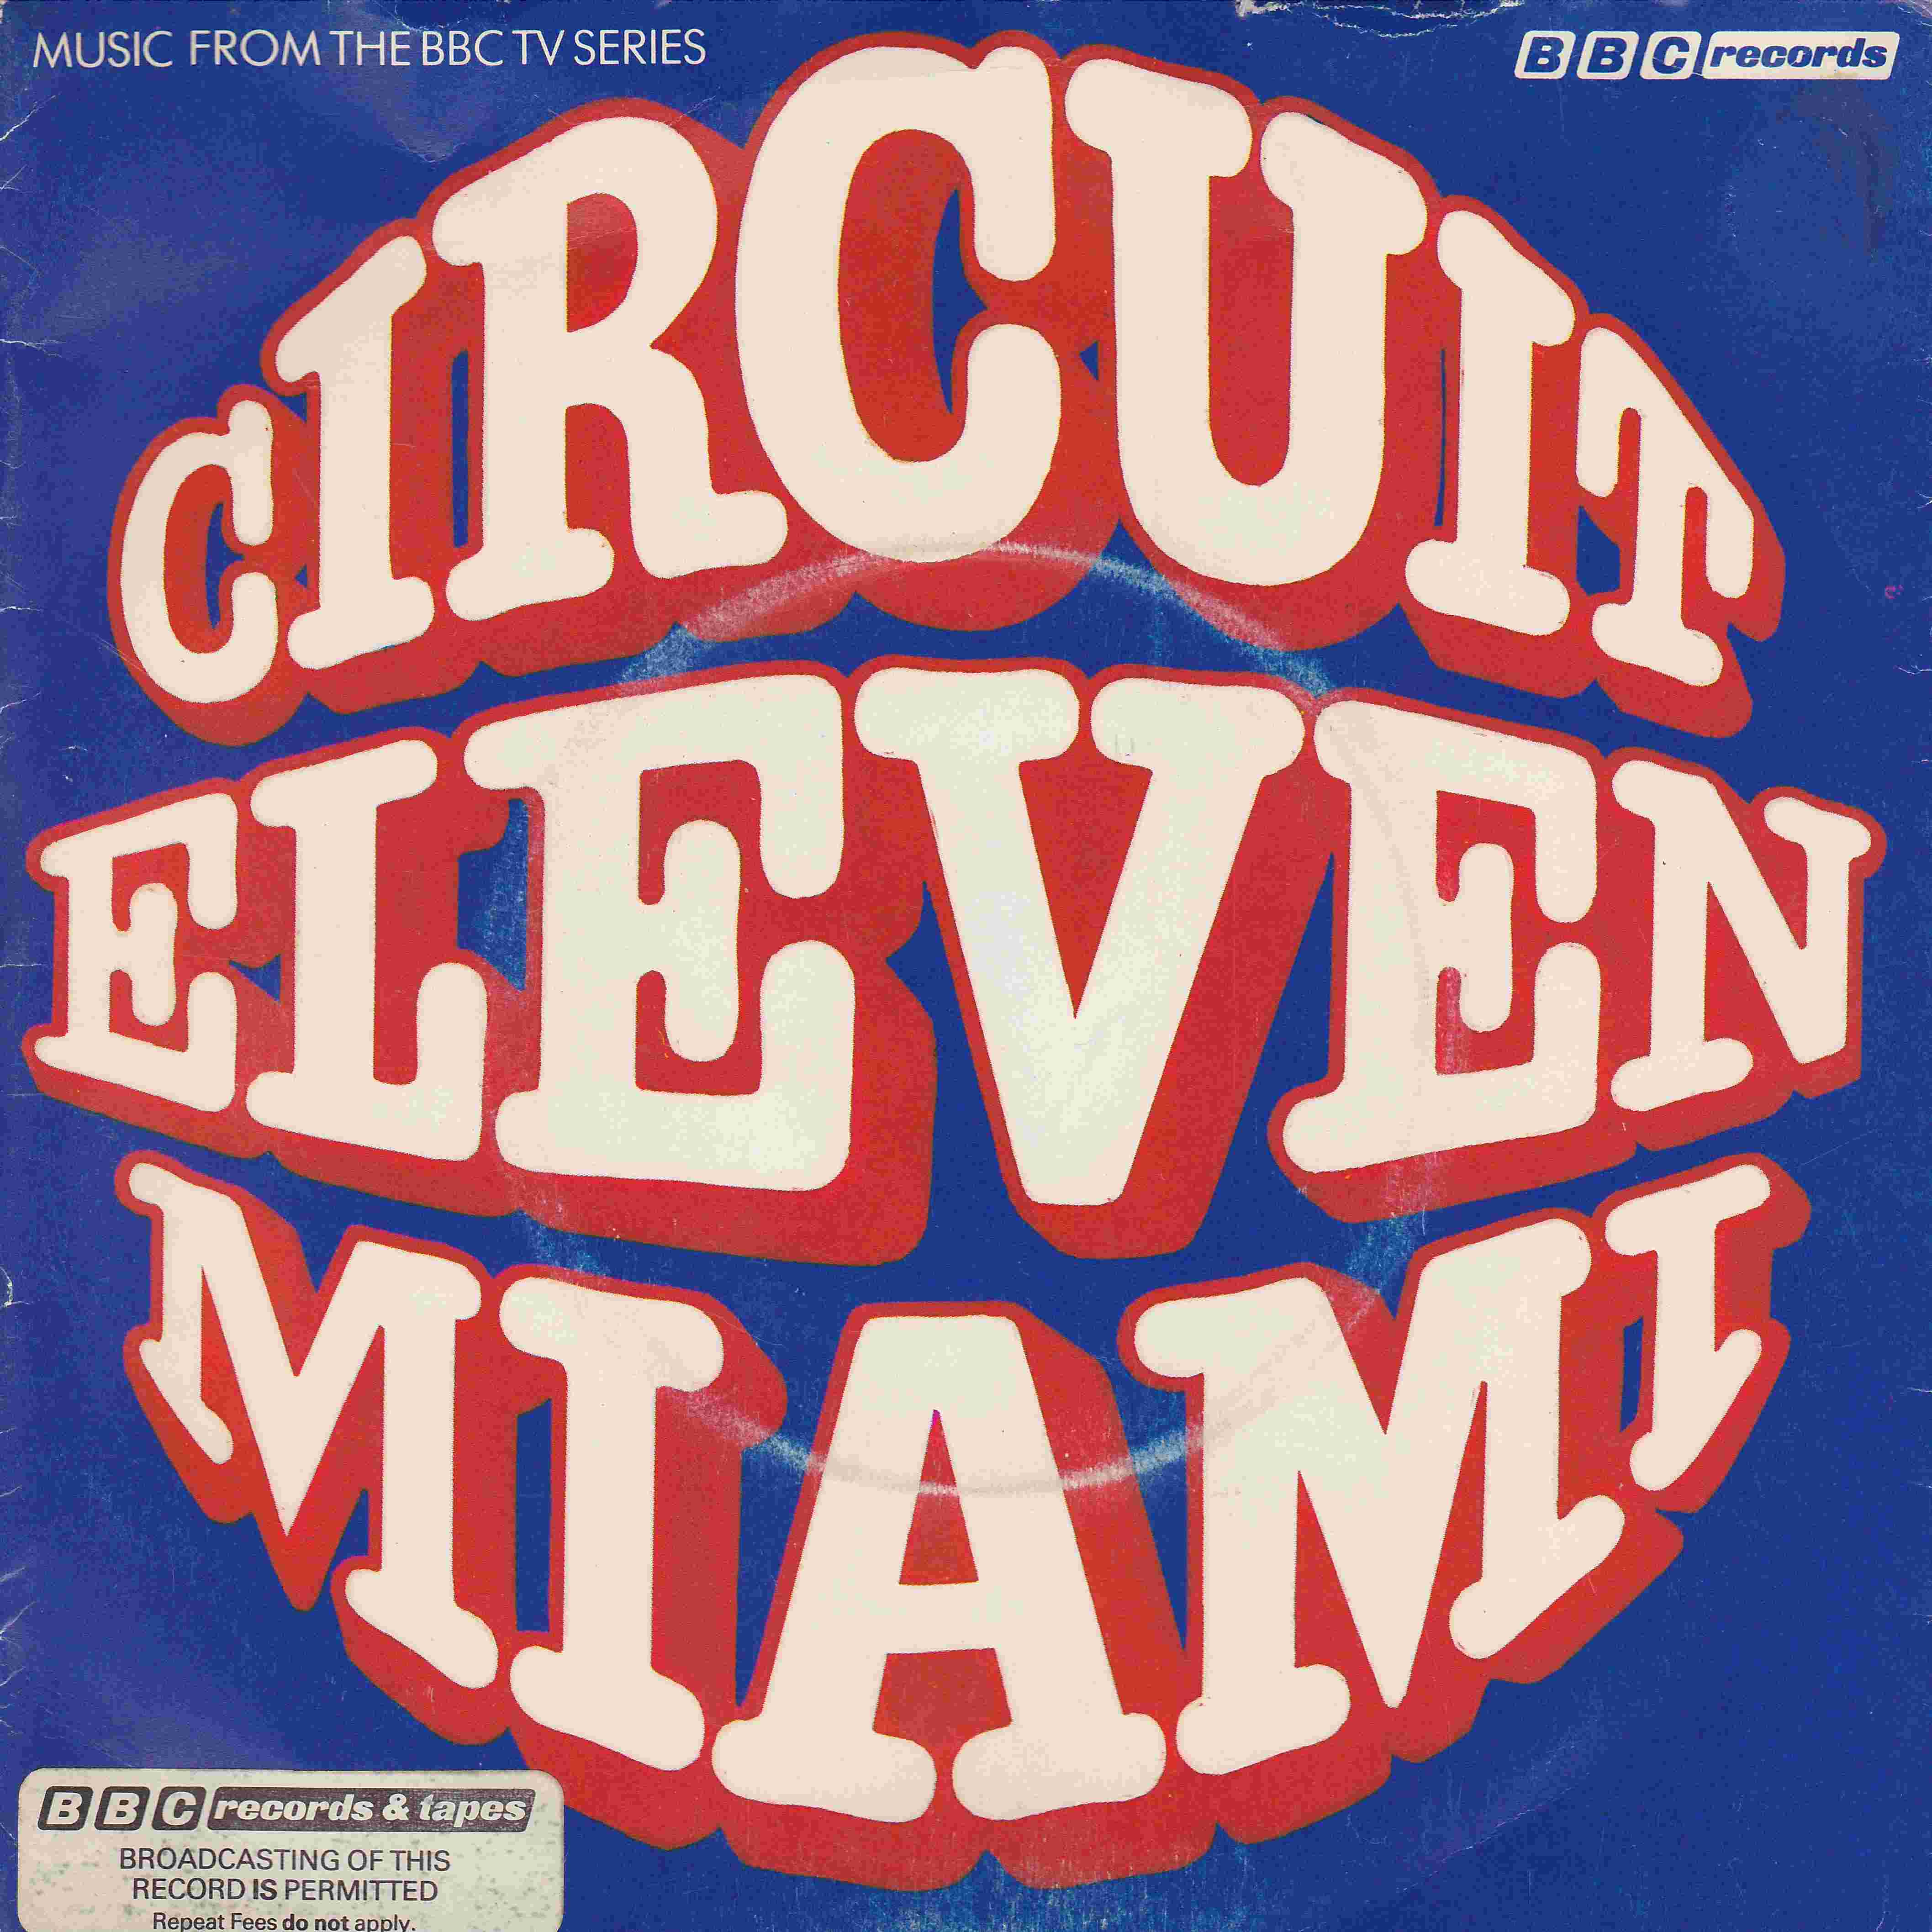 Picture of RESL 70 Circuit eleven - Miami by artist Richard Denton / Martin Cook from the BBC singles - Records and Tapes library